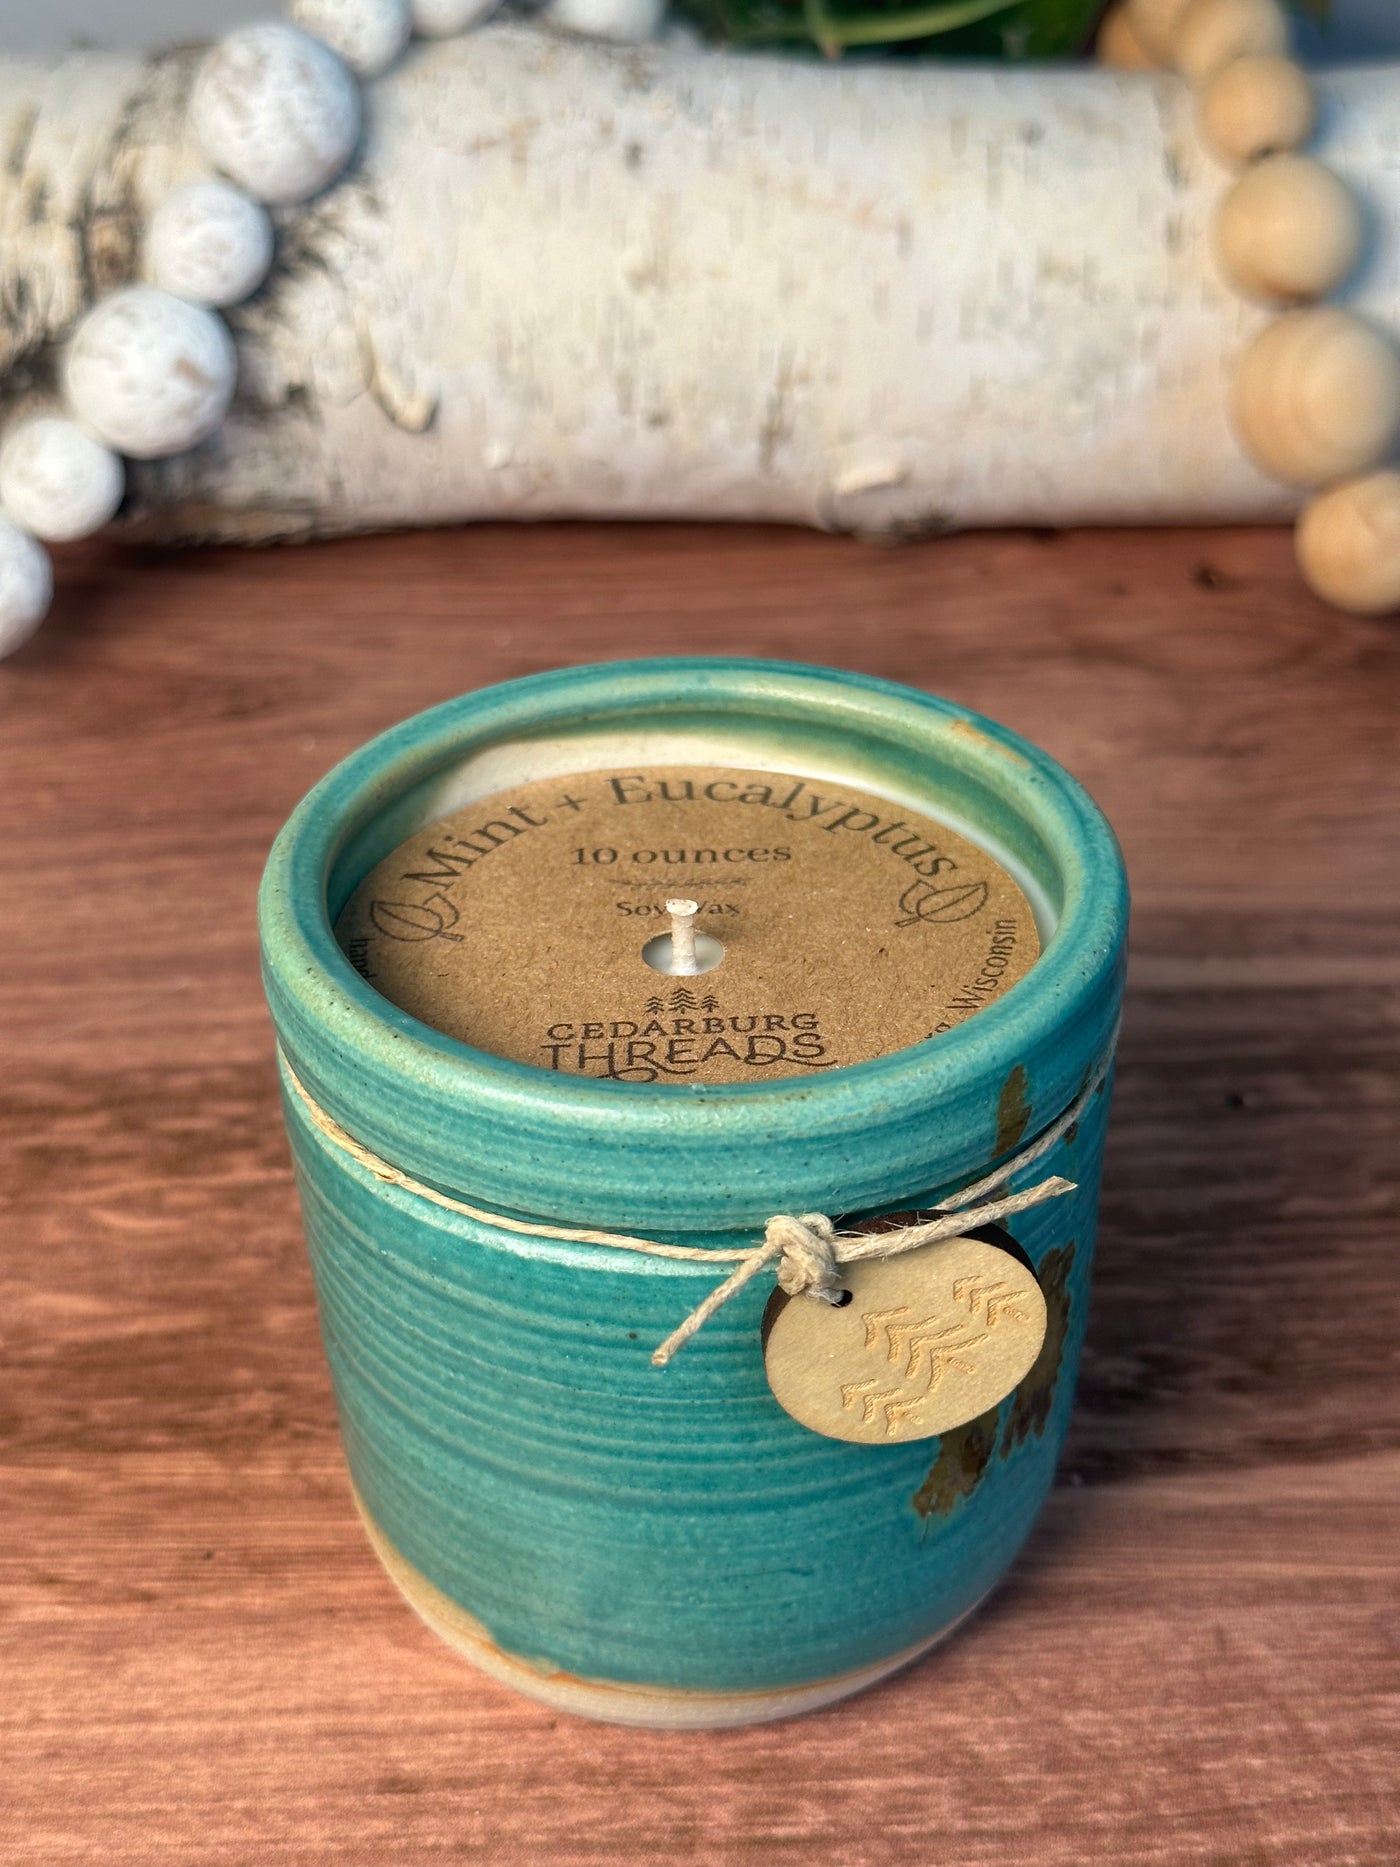 Mint & Eucalyptus soy hand poured candle in a 10 ounce teal vessel